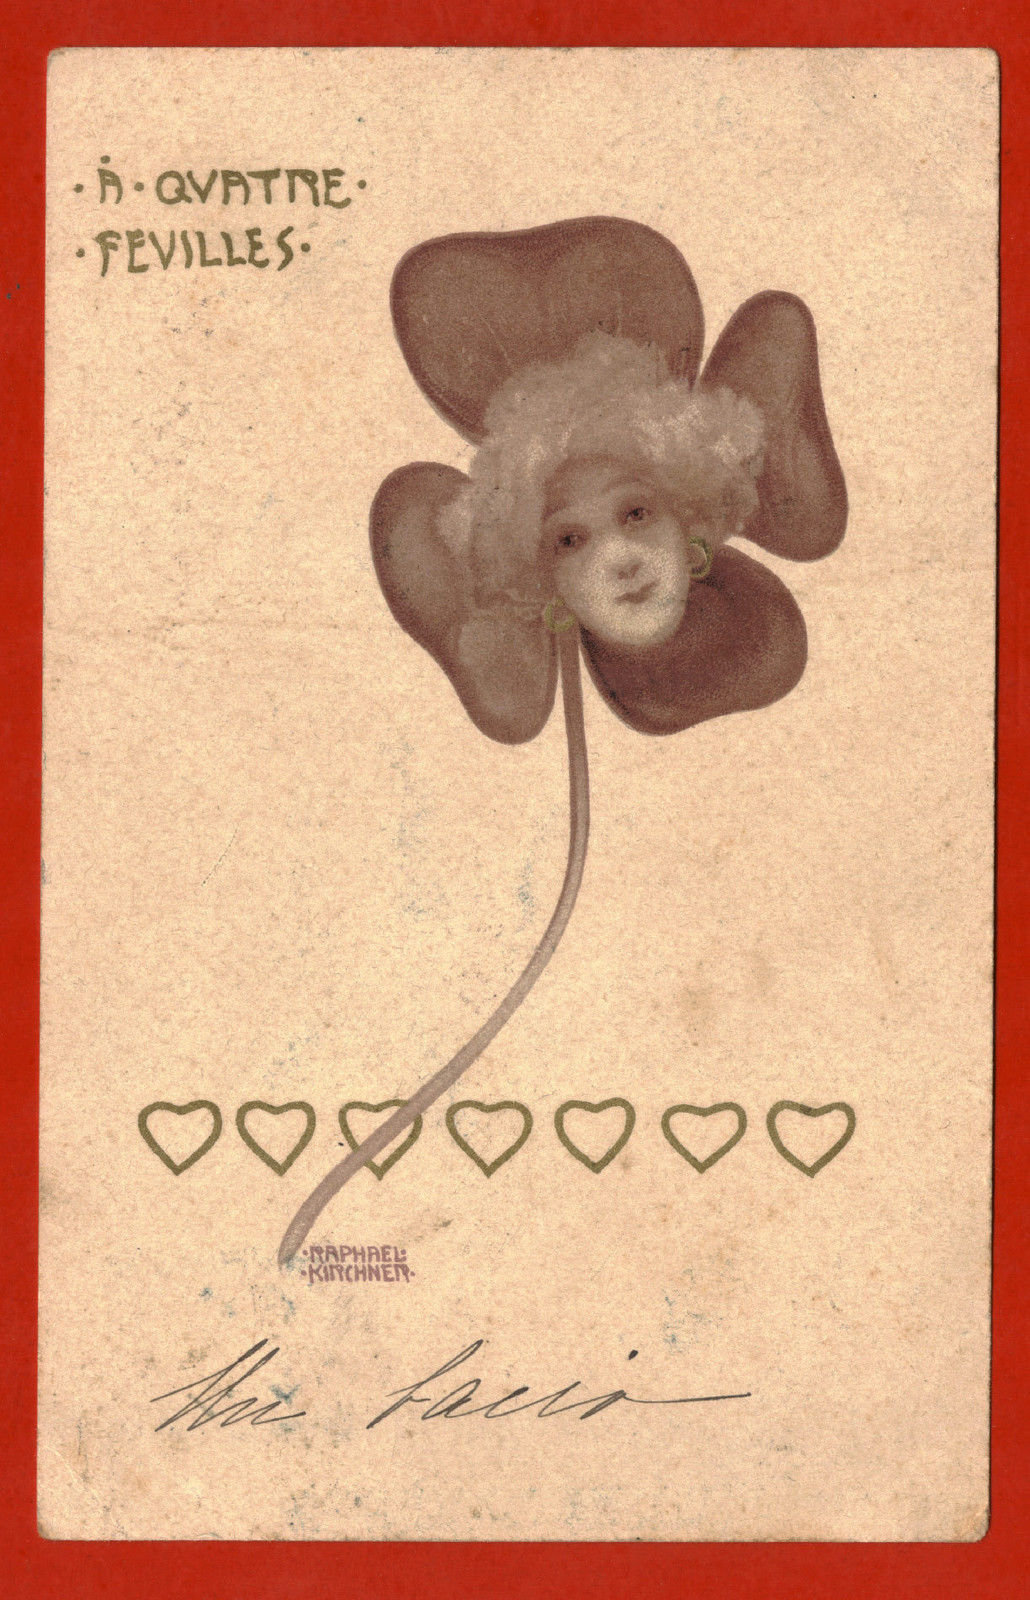 ILLUSTRATED BY RAPHAEL KIRCHNER, A QUATRE FEUILLES, FOUR-LEAVED WOMAN, 1908    m